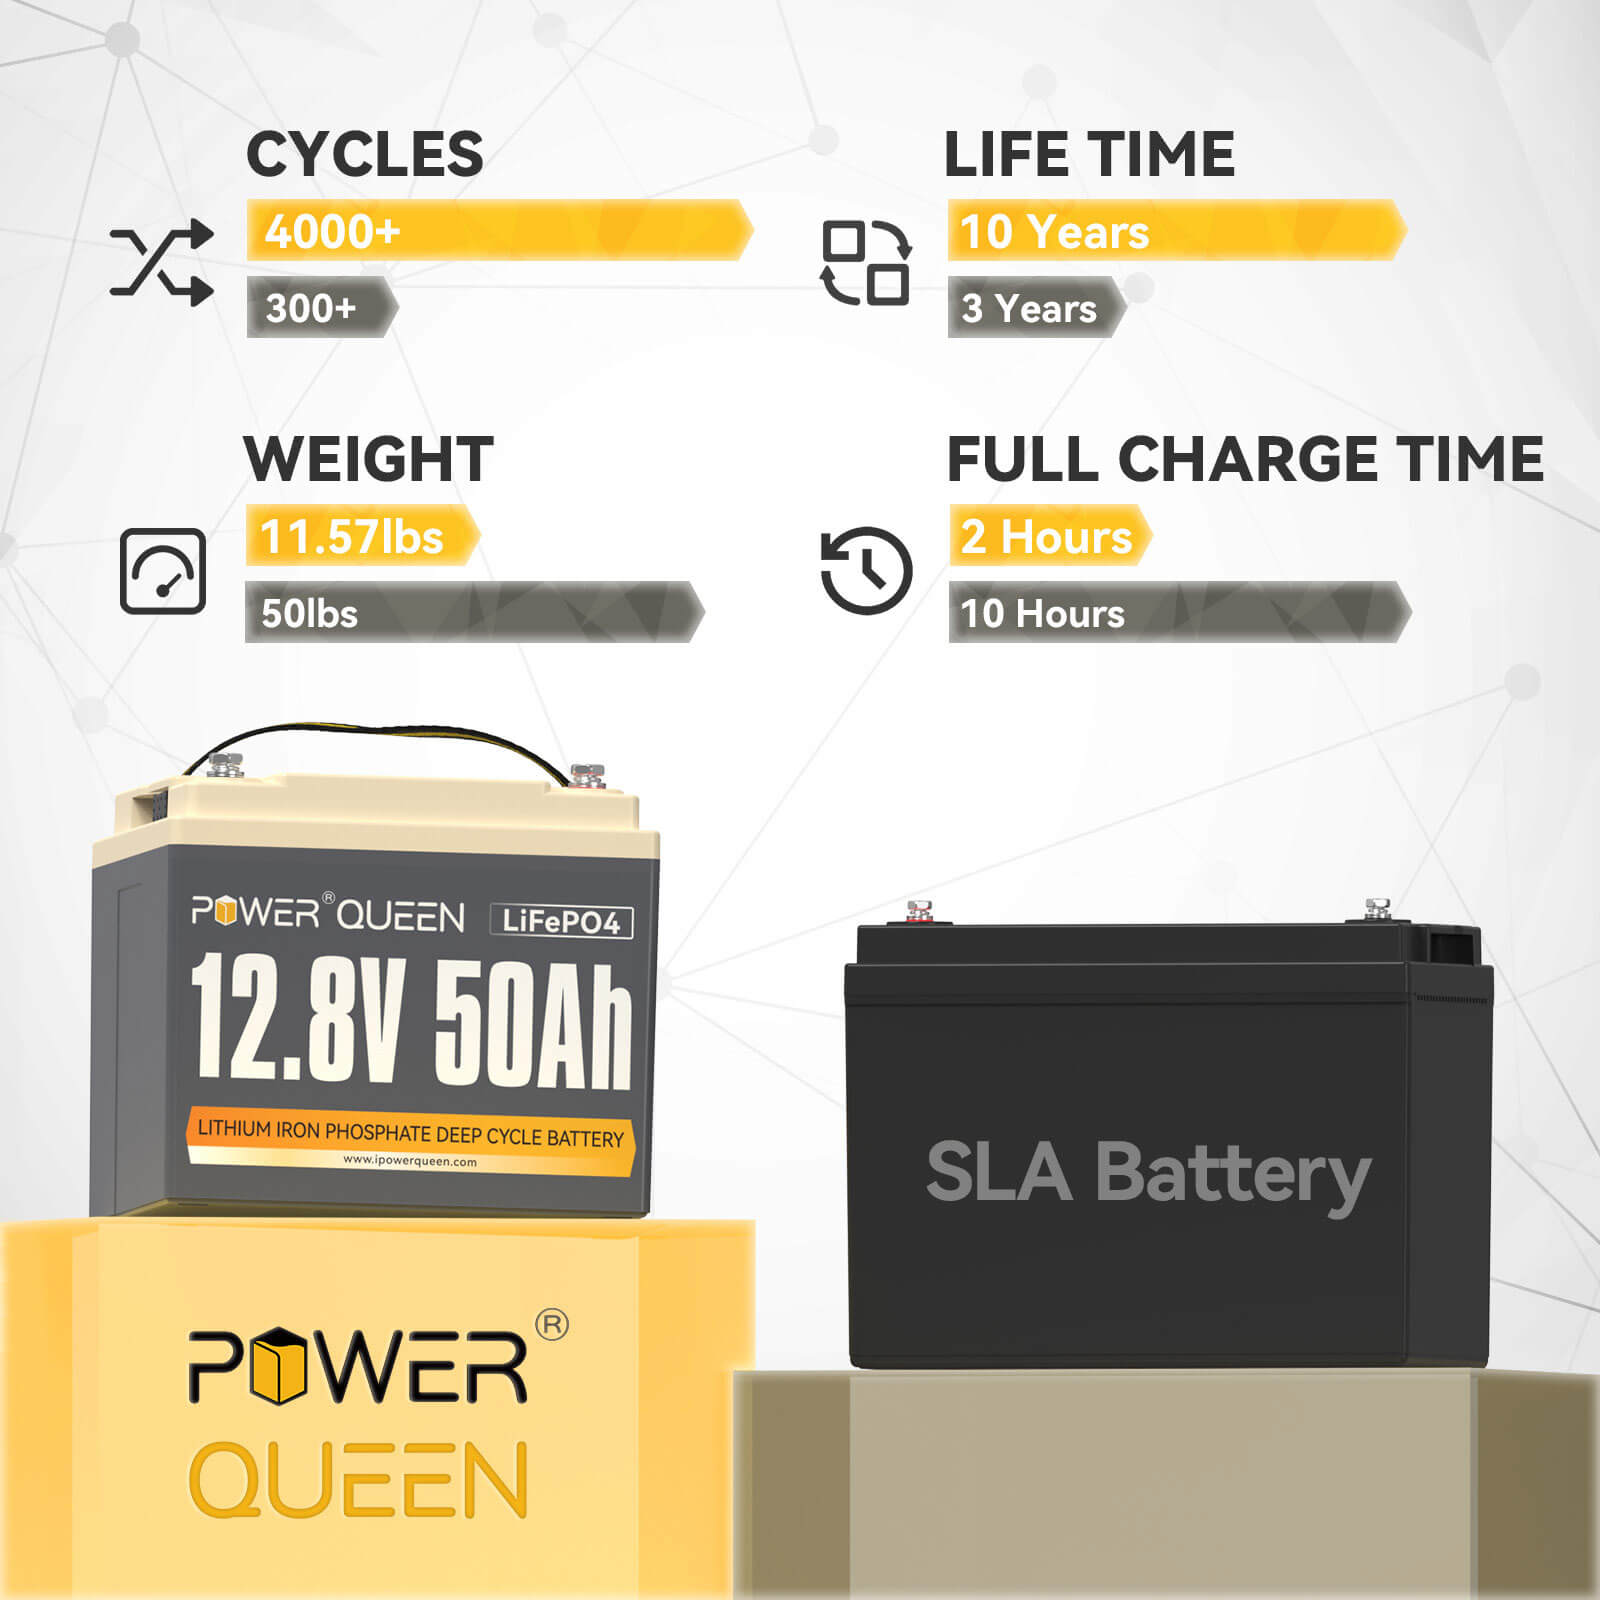 Power-Queen-12V-50Ah-LiFePO4-Battery-compared-with-SLA-Battery